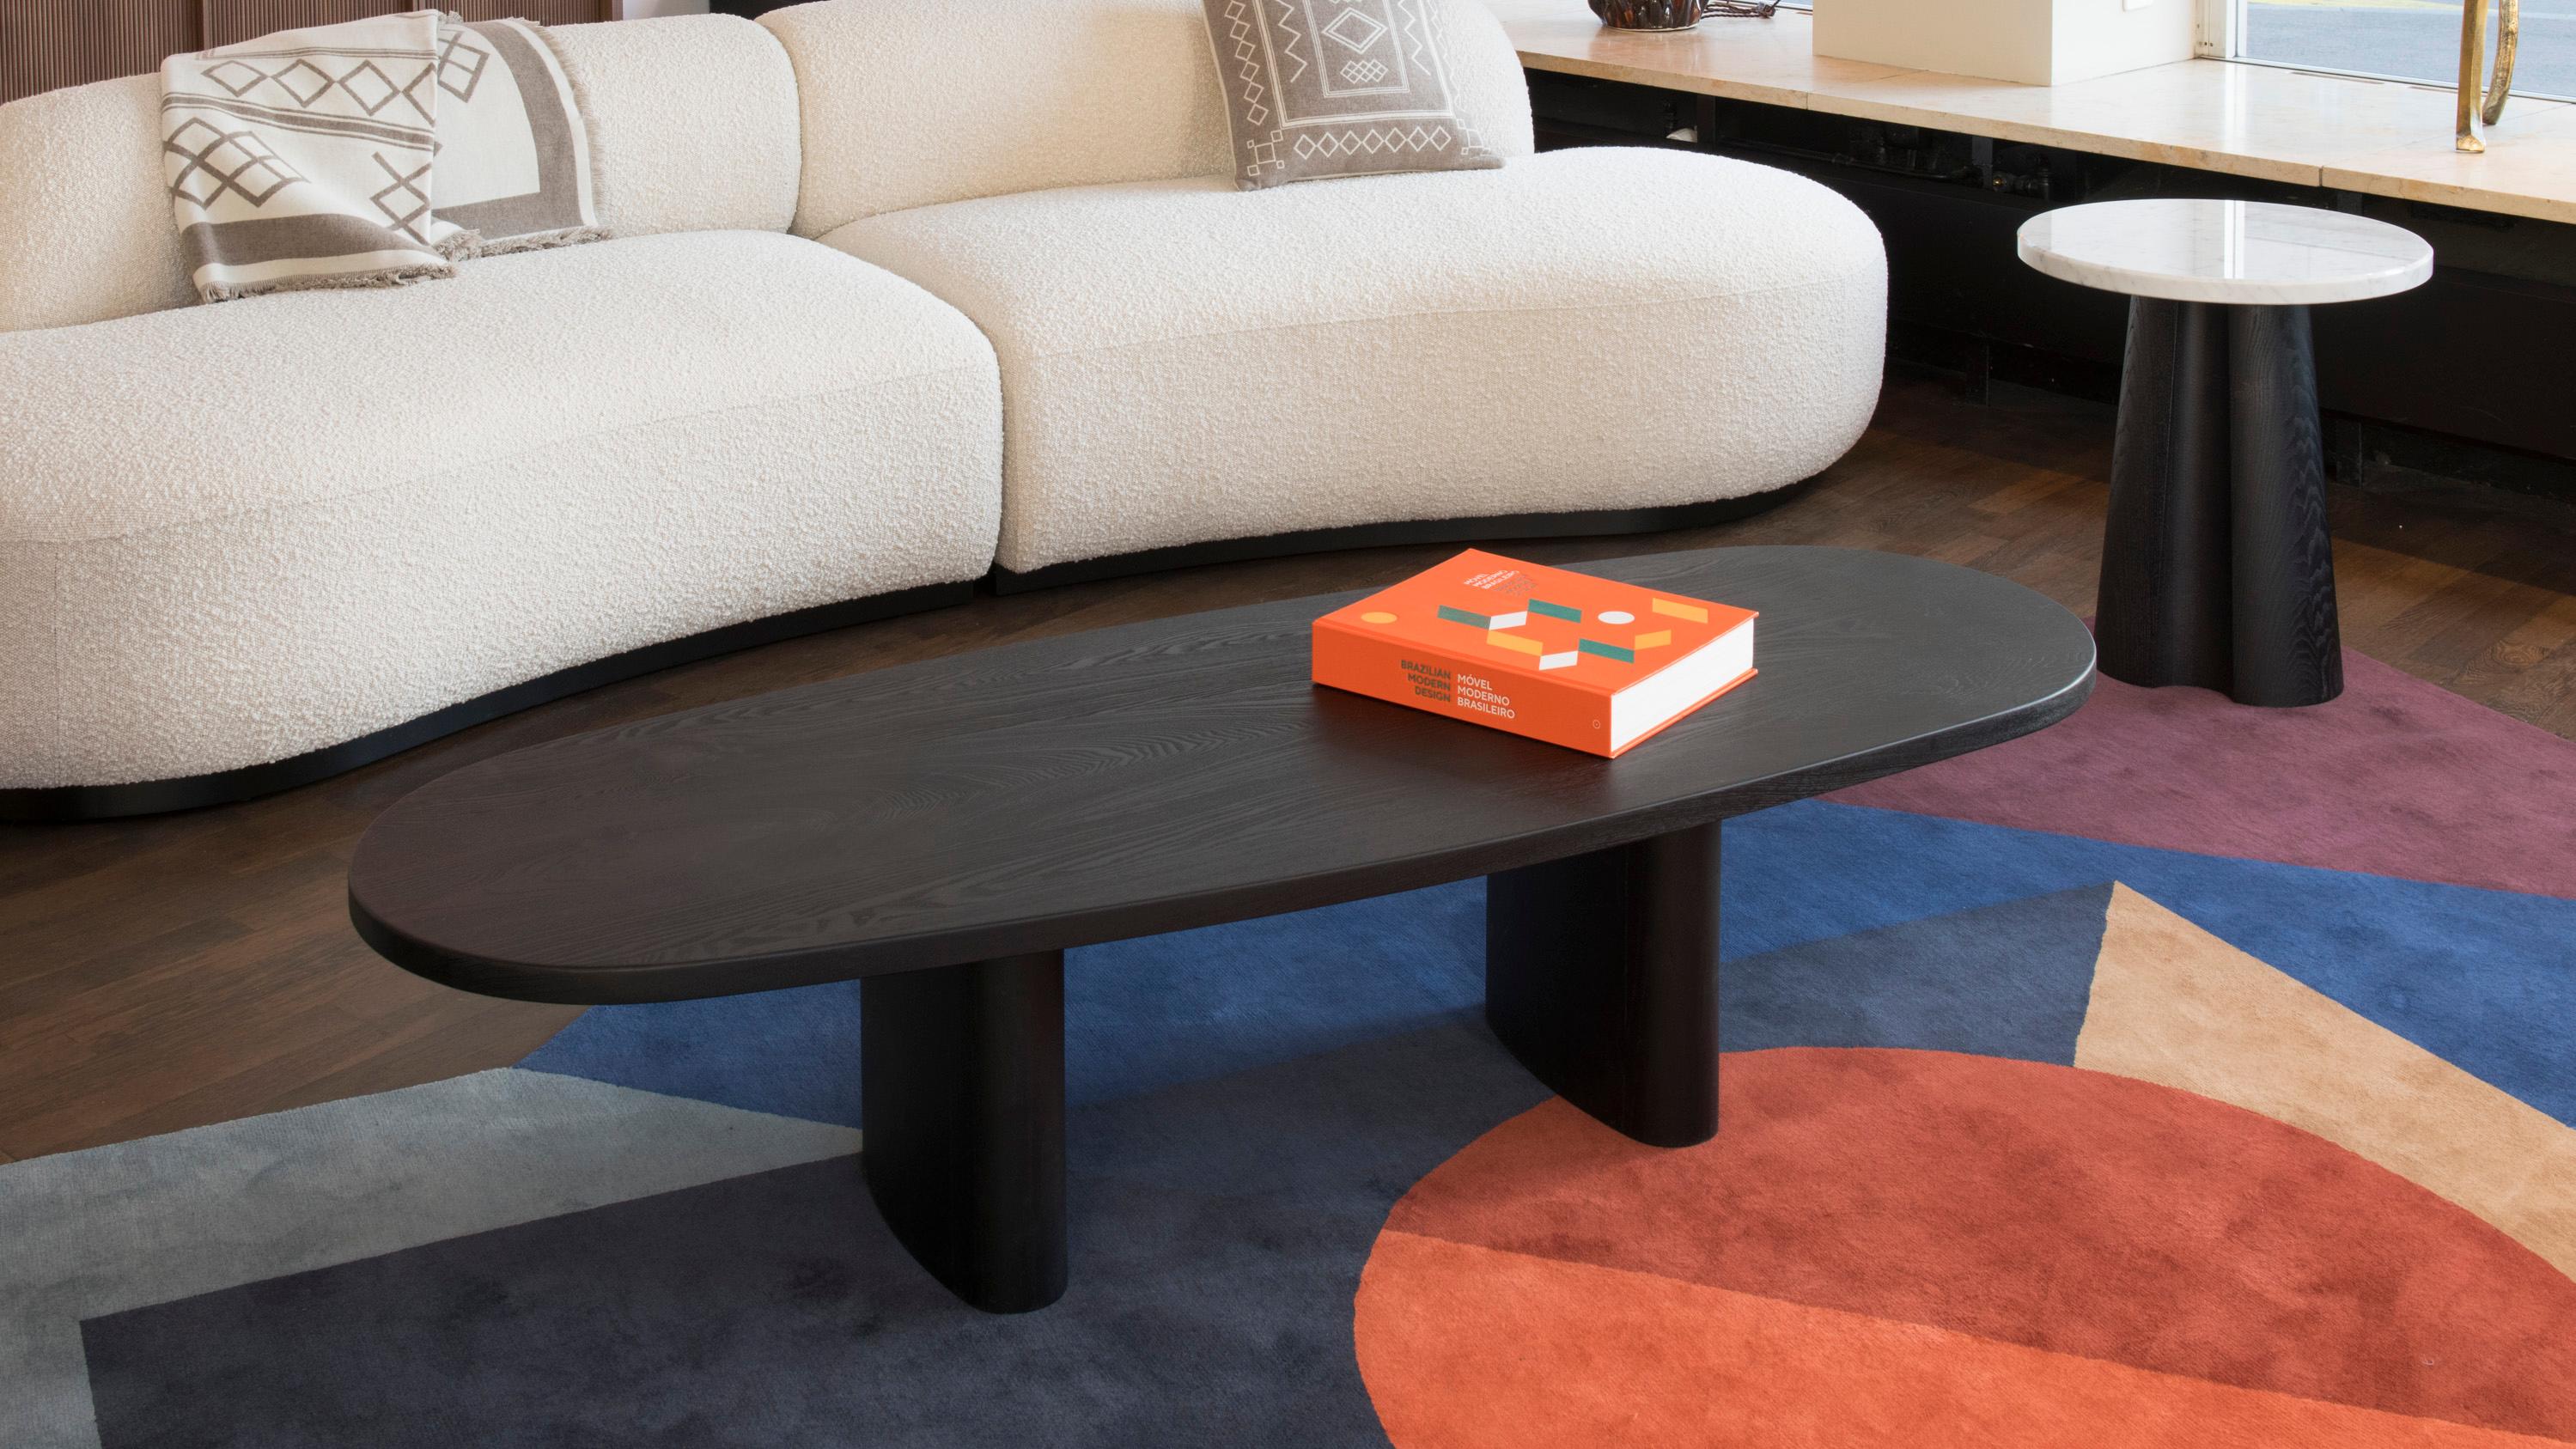 Black stained & brushed ash coffee table. His free oval top and feet shape offer a soft and warm design. This low table fit perfectly with a curved sofa and armchairs.
Designed by Olivier Moravik from Parisian based design studio mjiila, handmade